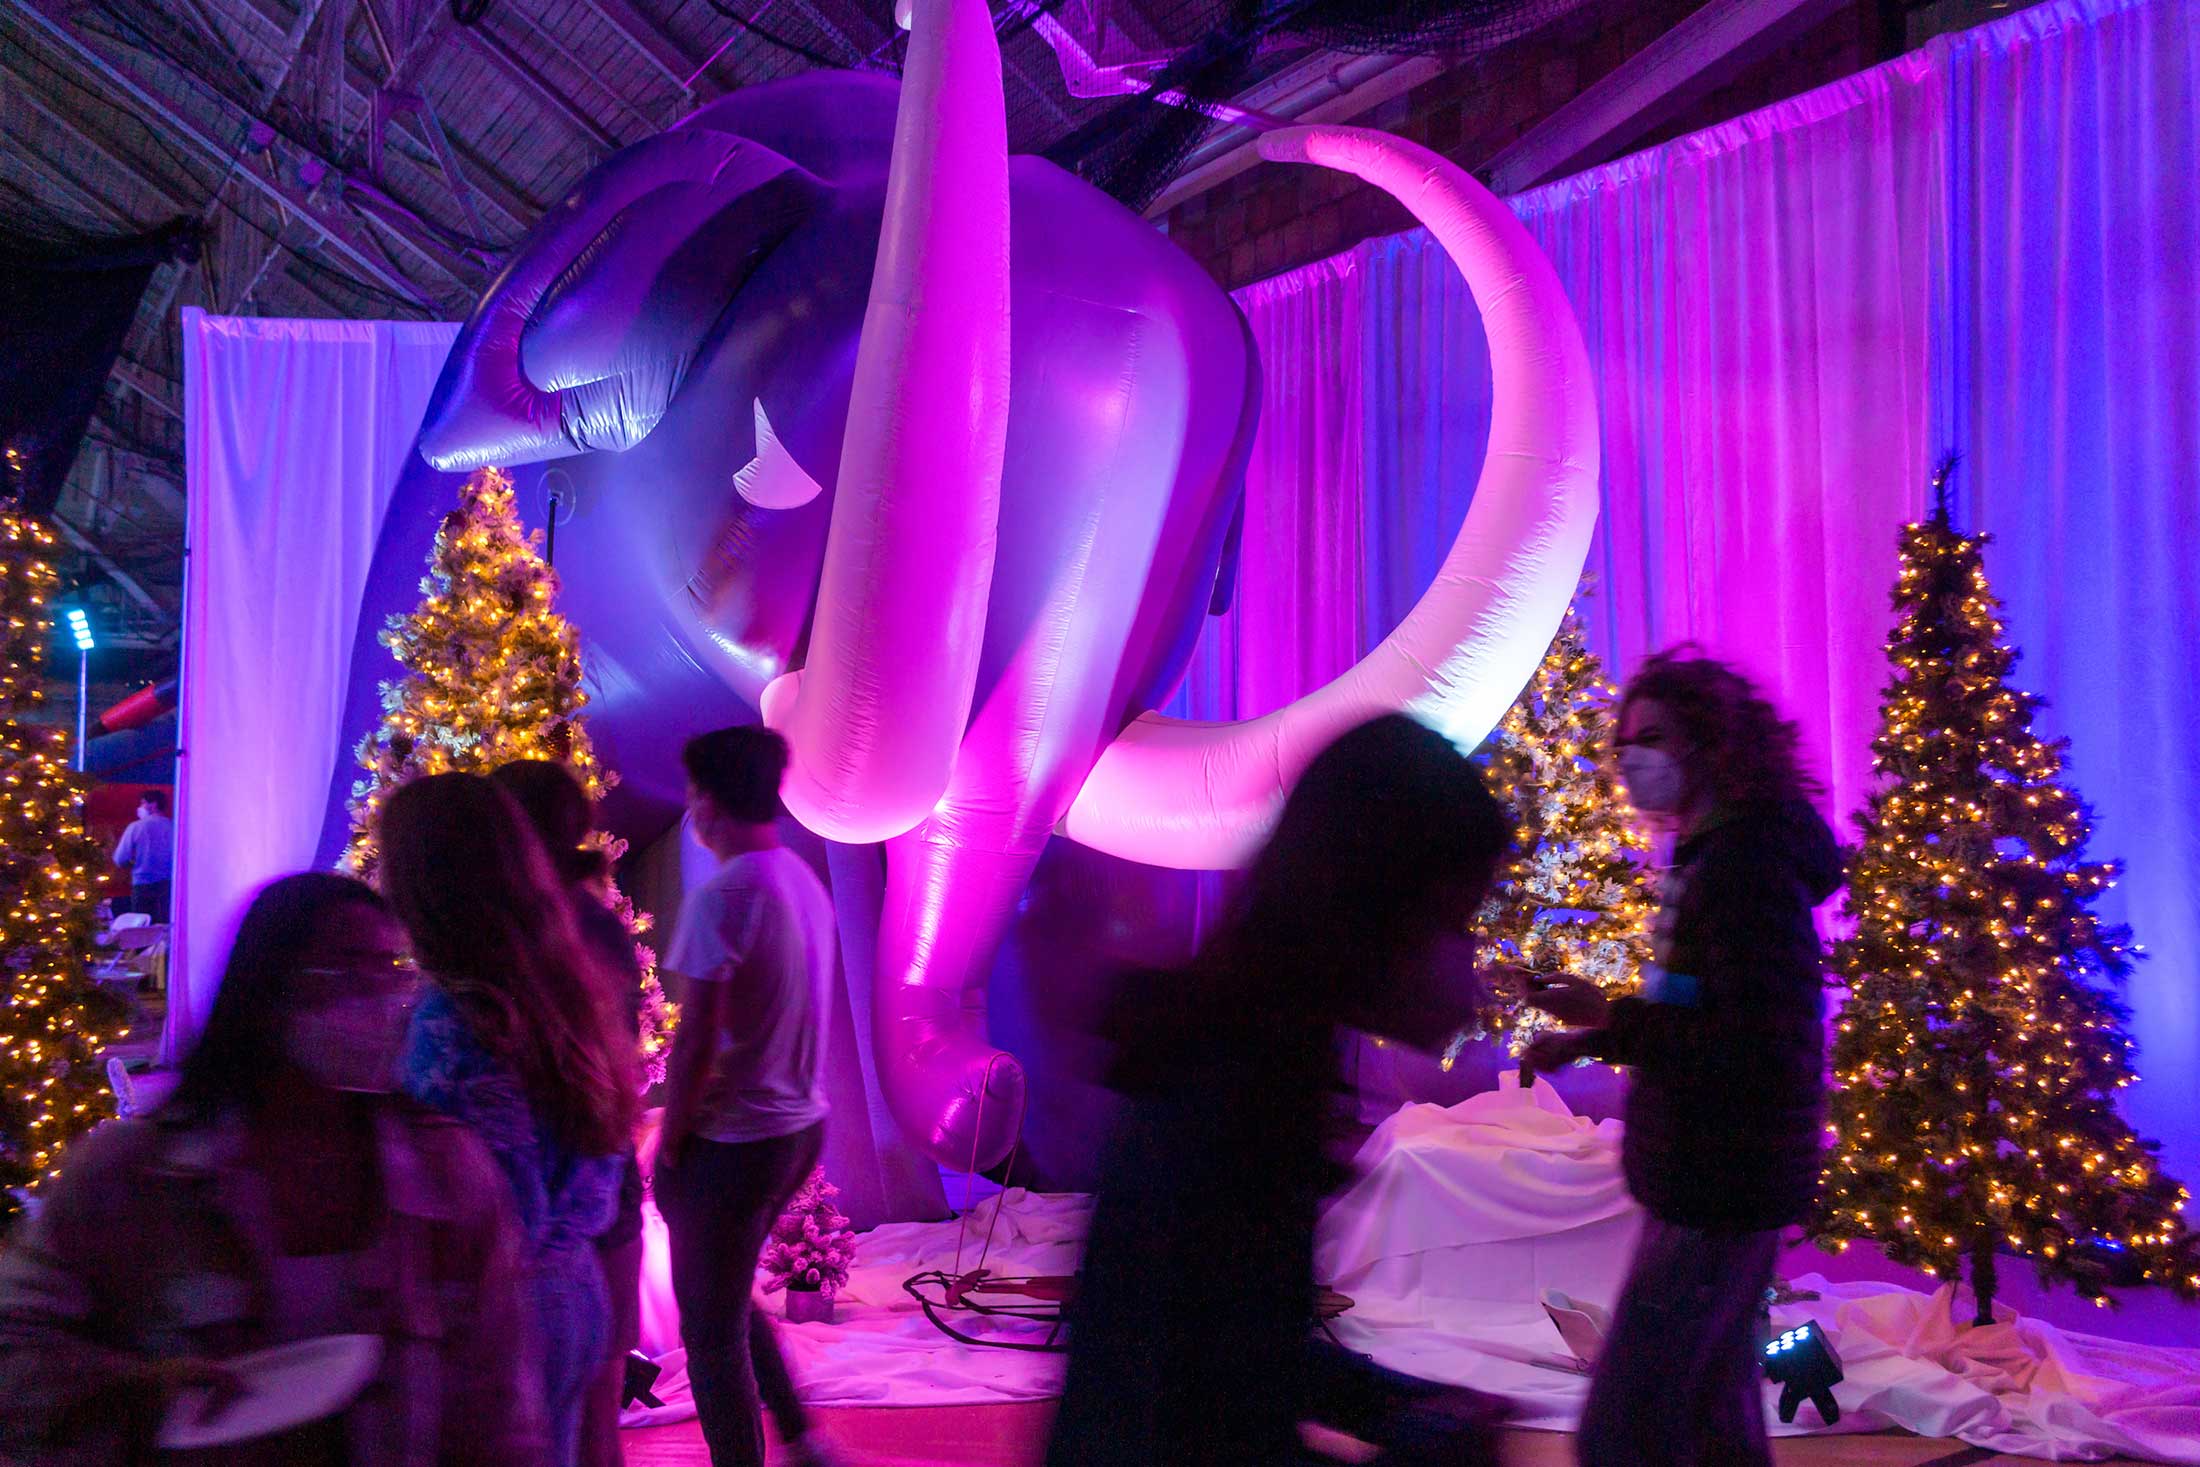 Students walking past a giant purple inflatable mammoth at the entry way to Winter Fest.